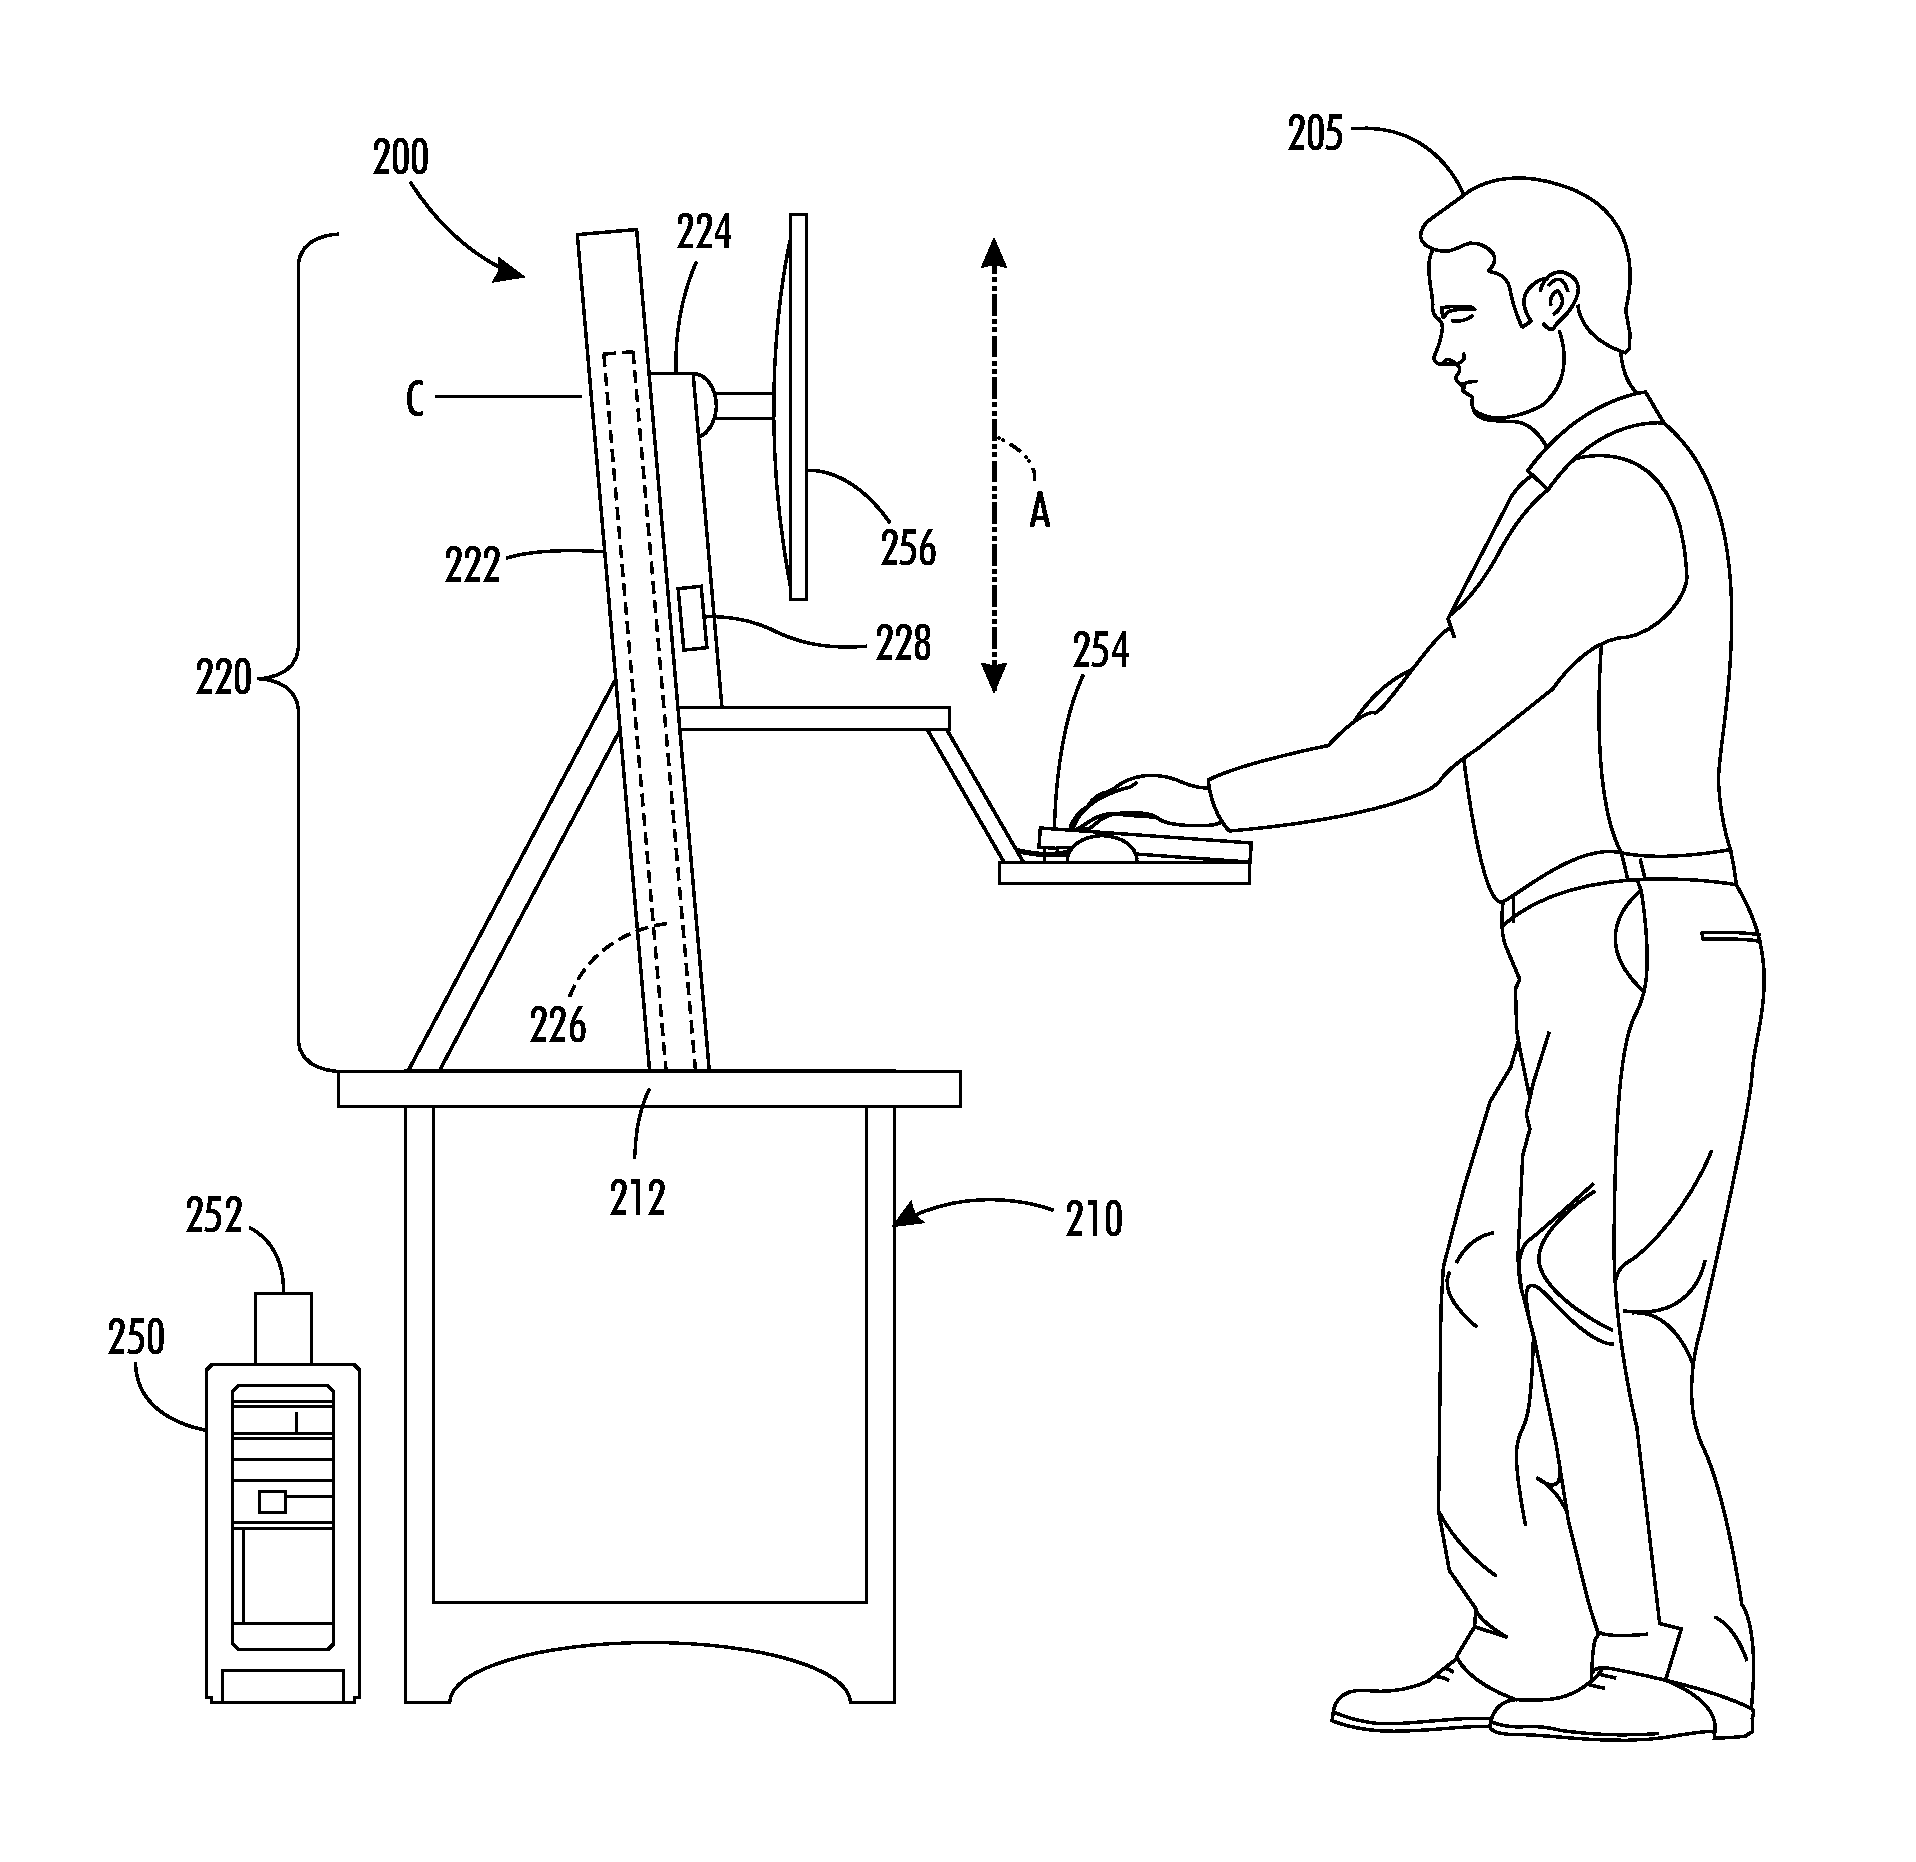 Systems and methods for implementing automated workstation elevation position tracking and control